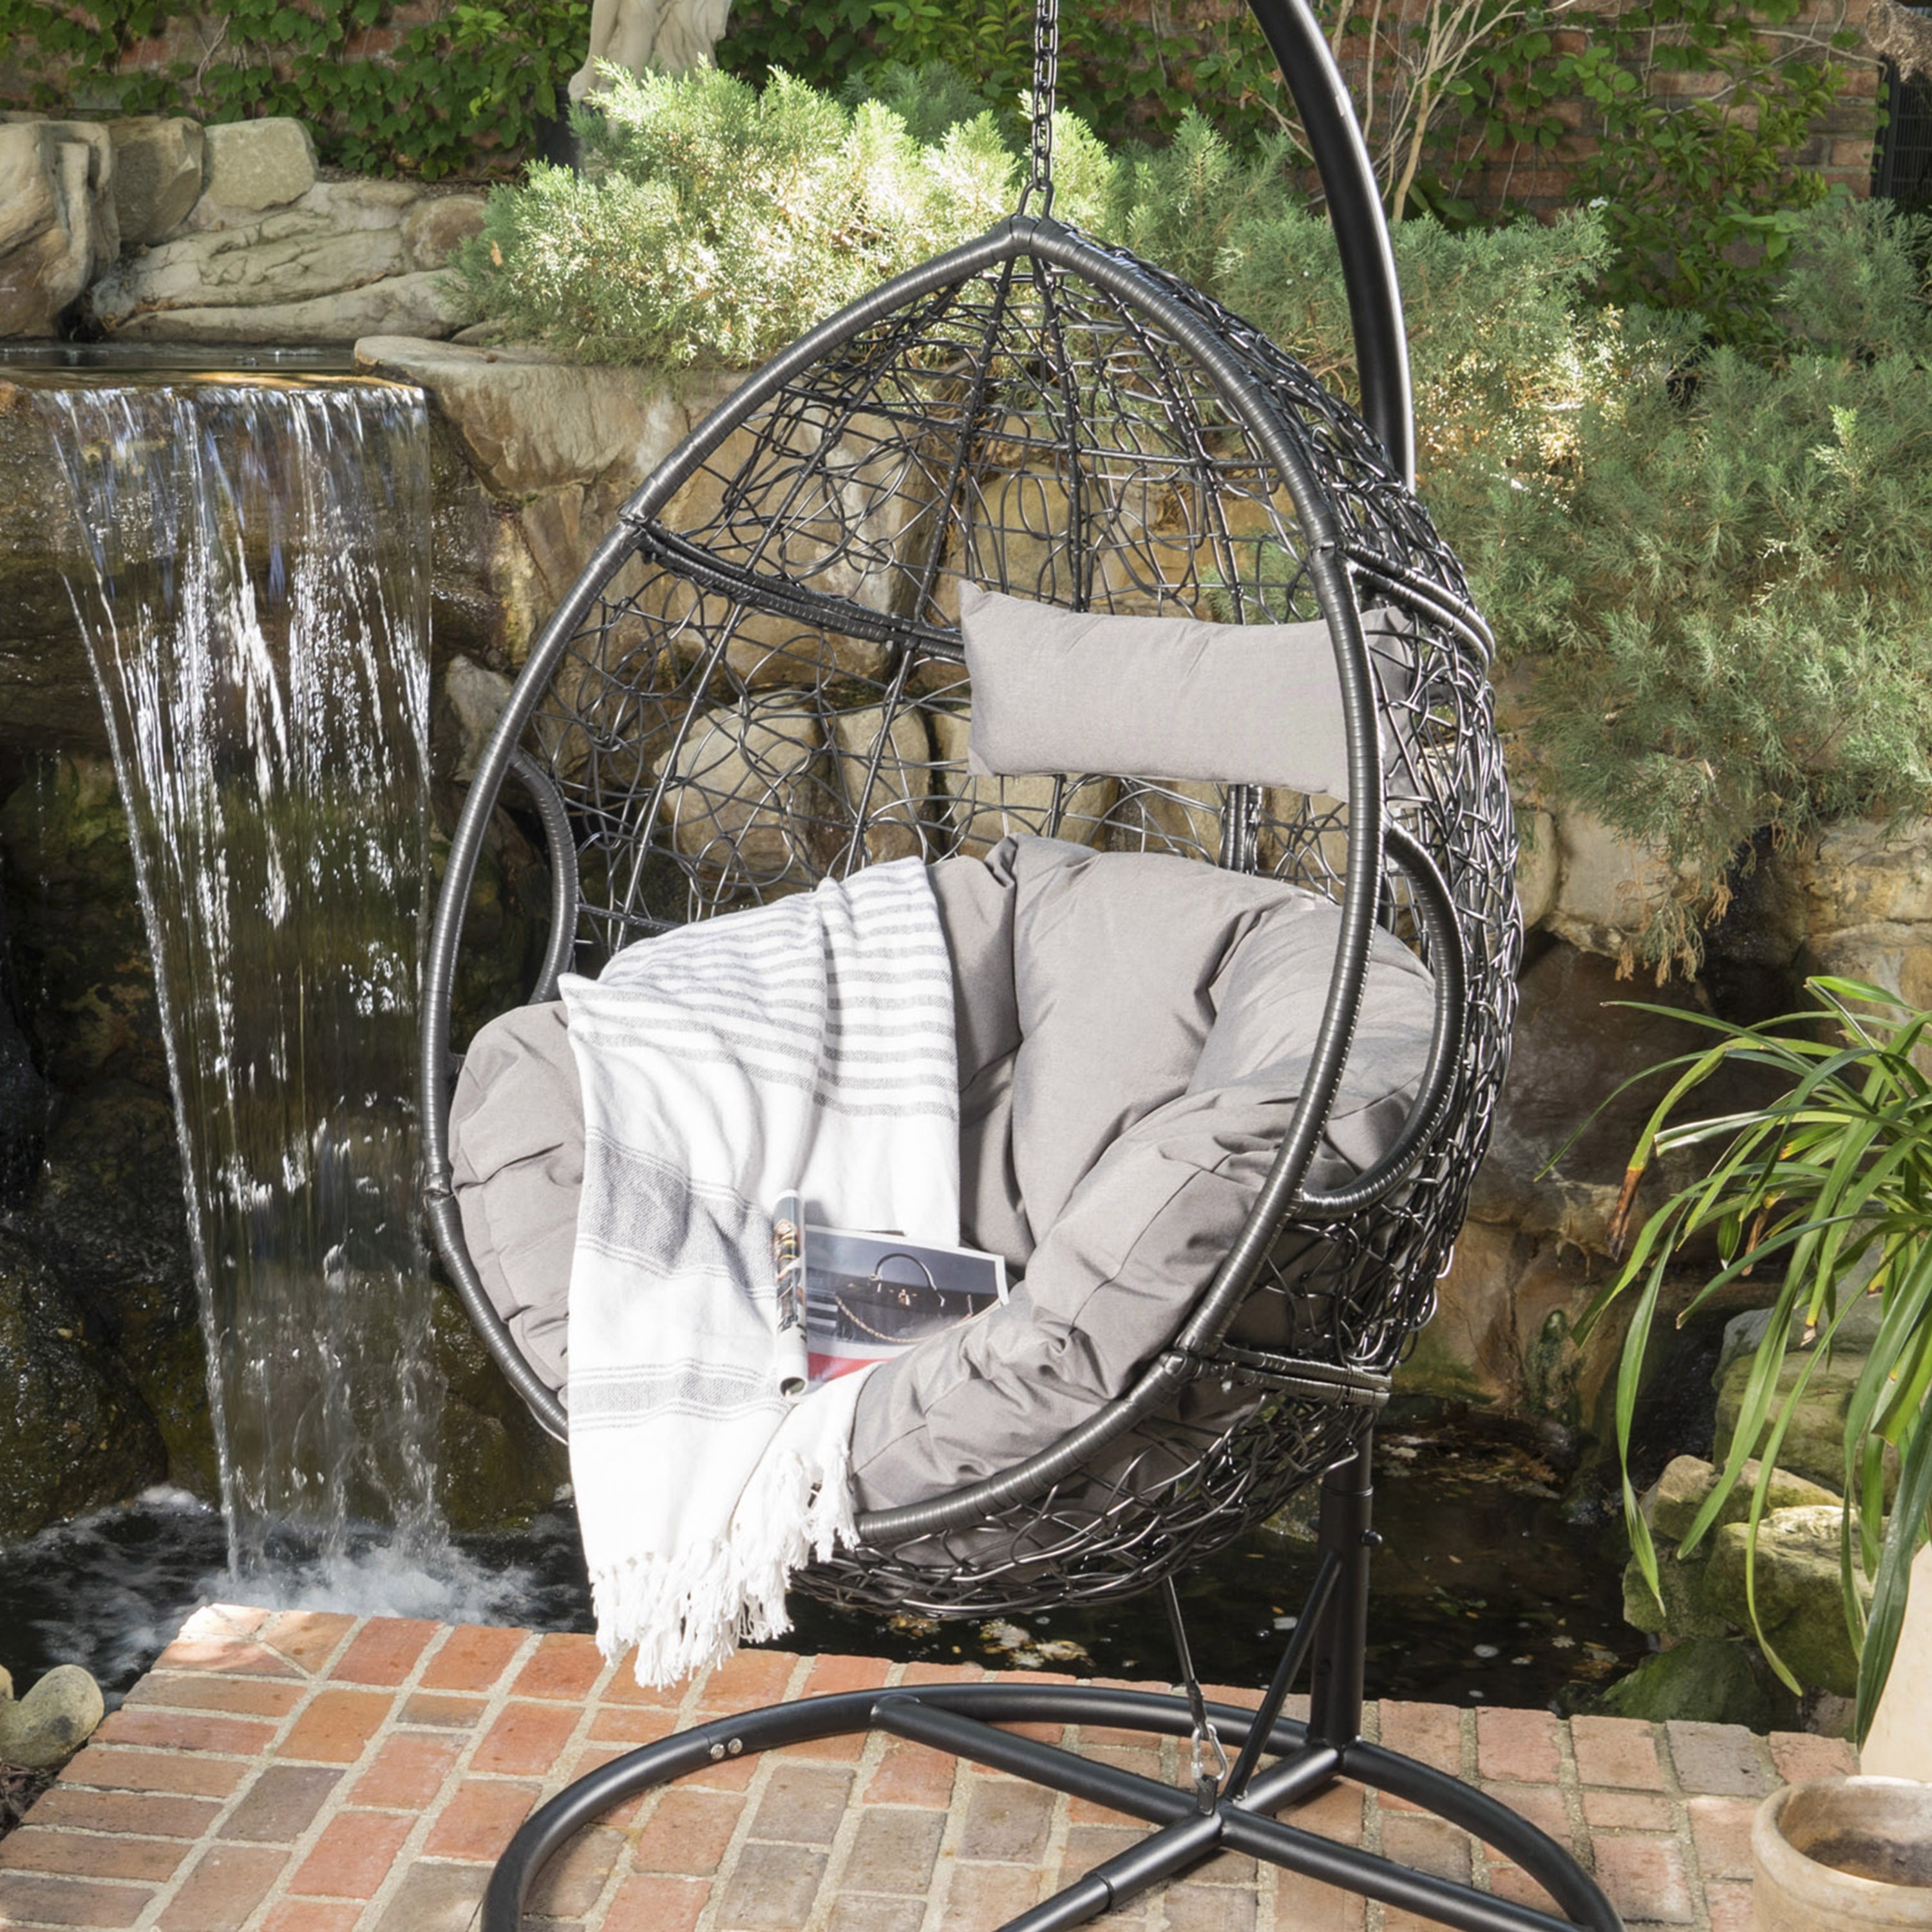 37 75 26 5 49 inch hammock chair with removable waterproof polyester seat cushion in neutral tones with a durable woven finish durable and versatile suitable for outdoor scenes such as garden terrace backyard 0